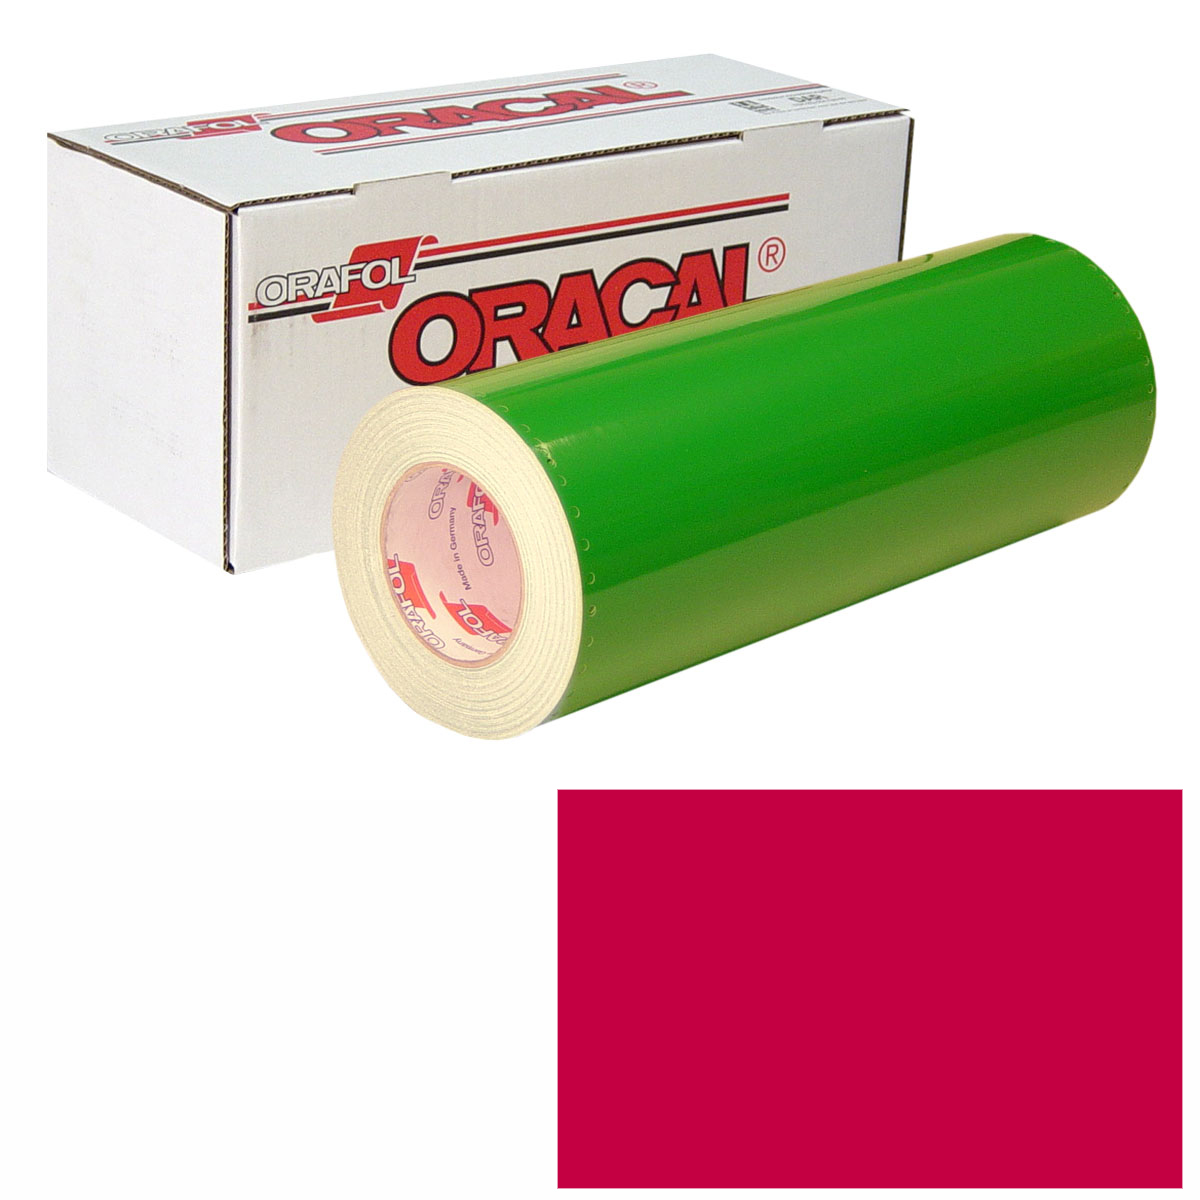 ORACAL 951 30in X 50yd 031 Red